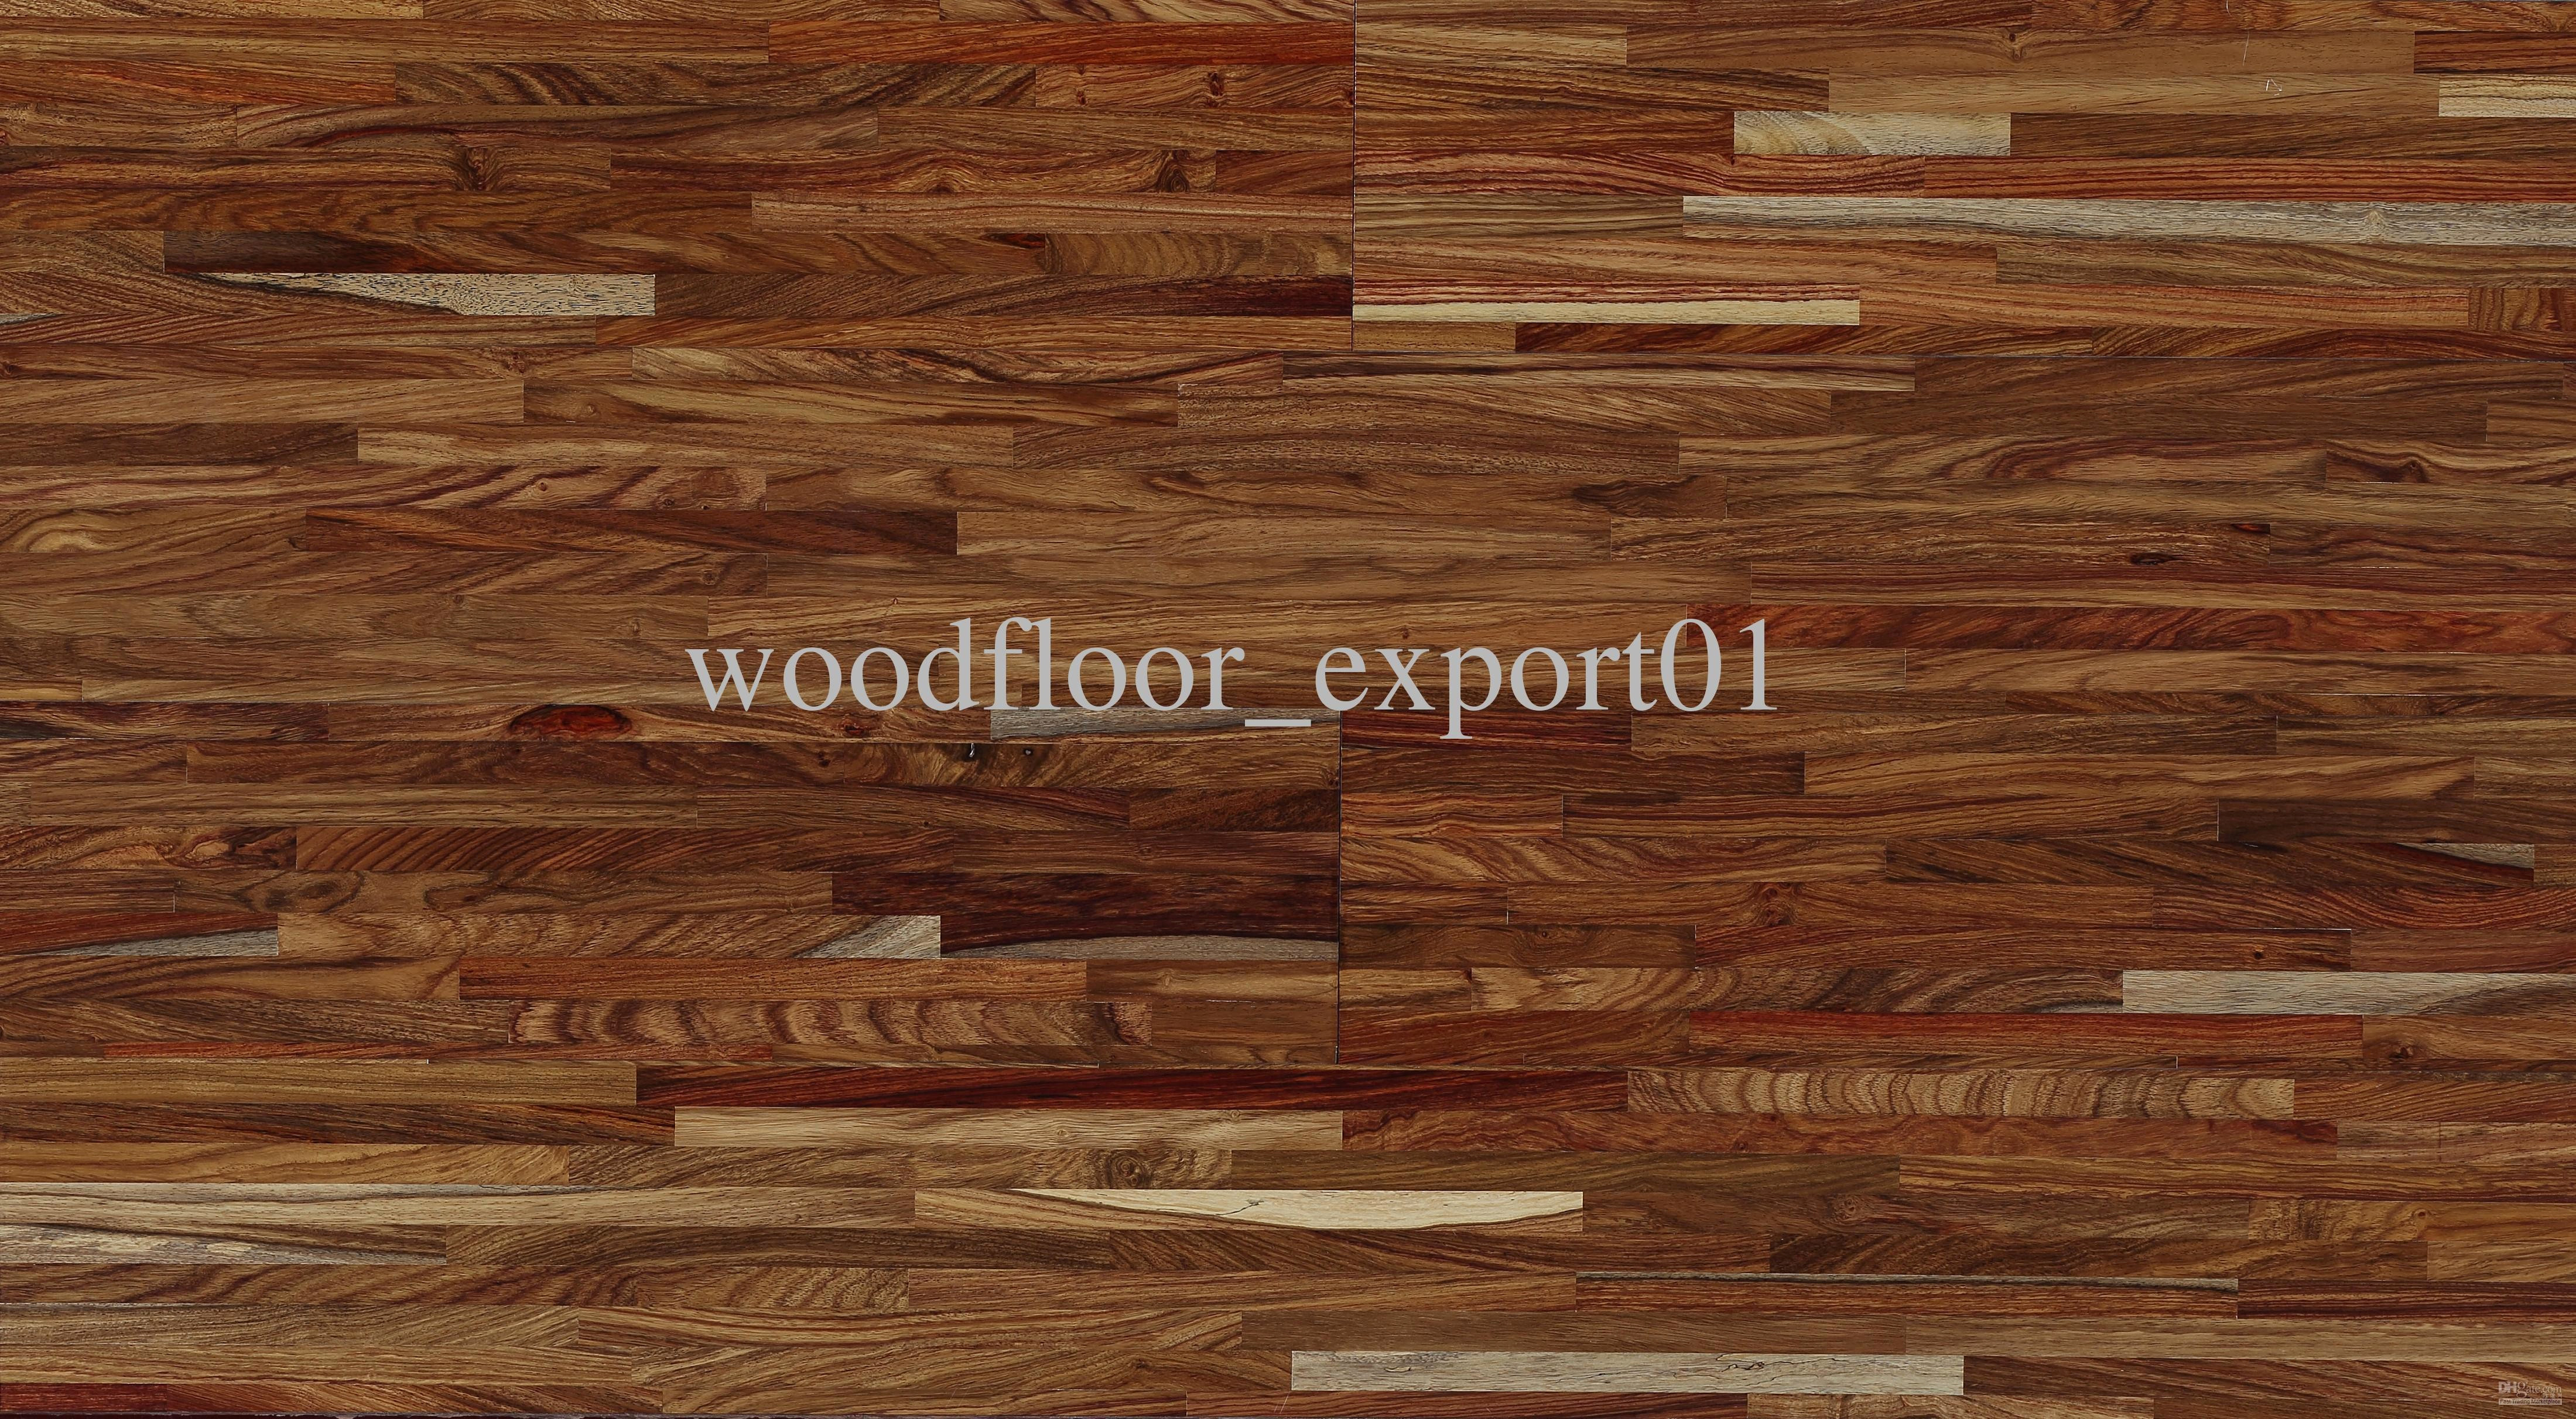 hardwood flooring stores los angeles of cheap hardwood flooring for sale hardwood floor water damage warping with regard to related post where to buy hardwood flooring inspirational 0d 50 new hardwood flooring los angeles